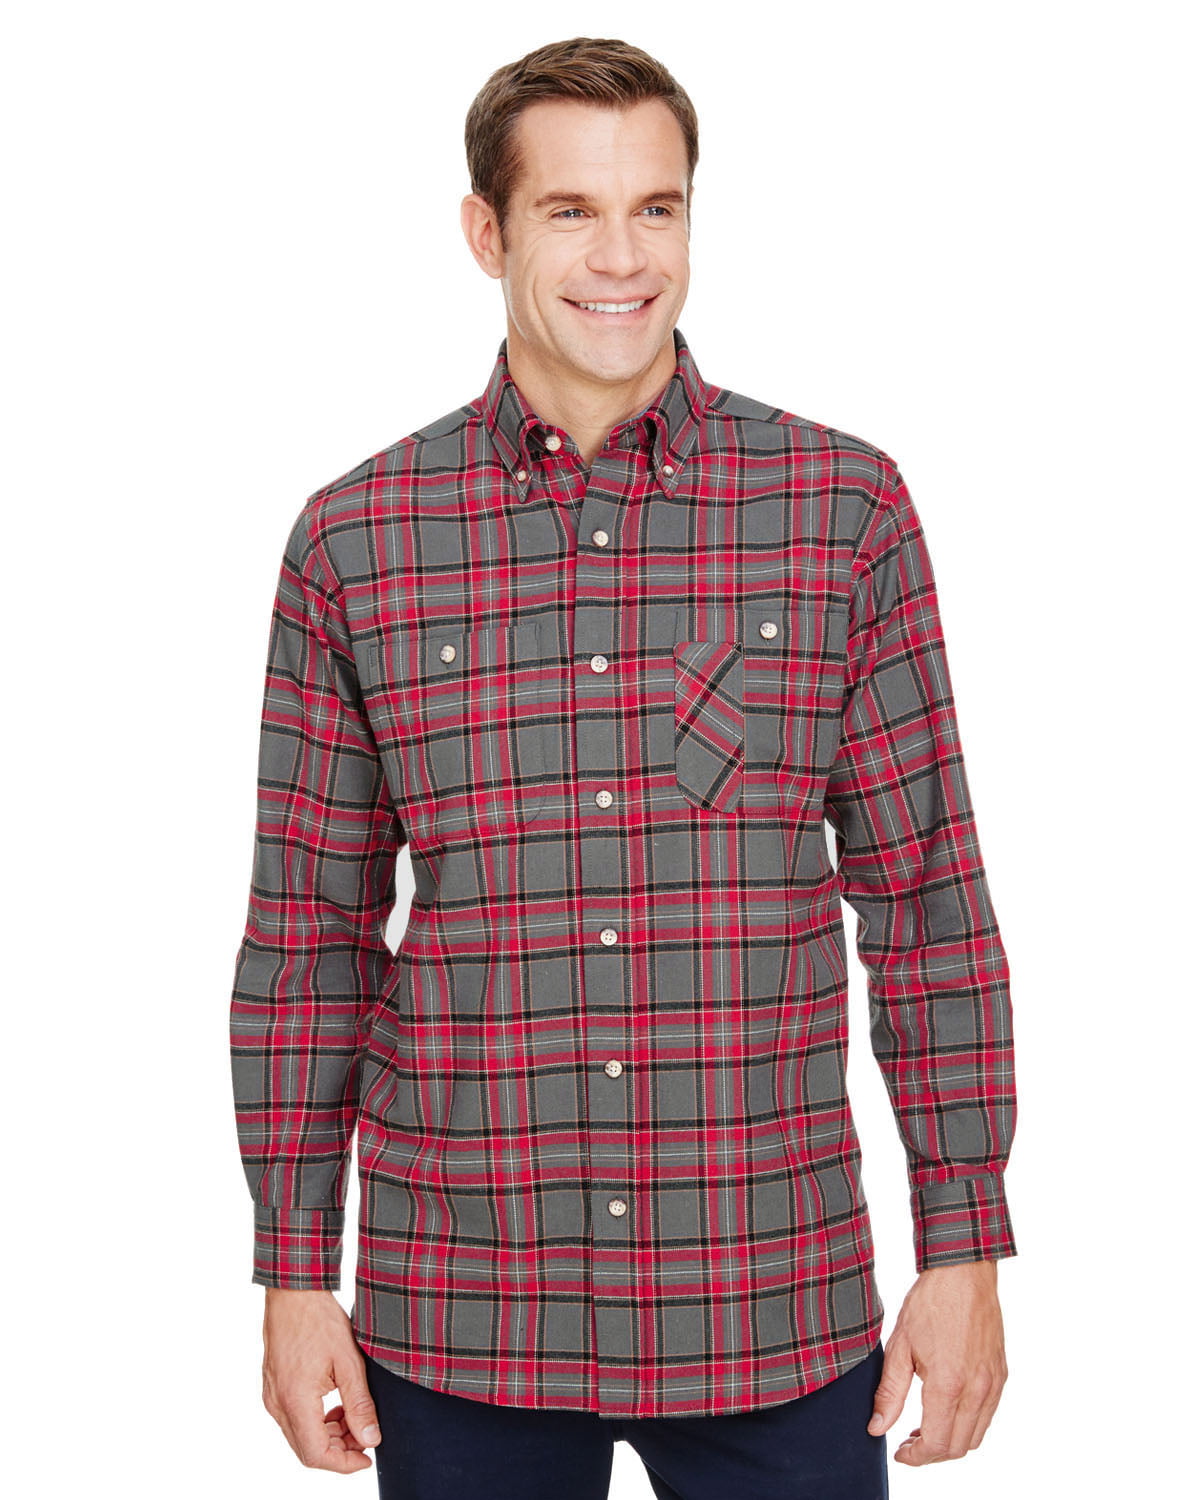 New Mens Yarn Dyed Flannel Lumberjack Check Brushed Cotton Work Shirt Small-XXL 